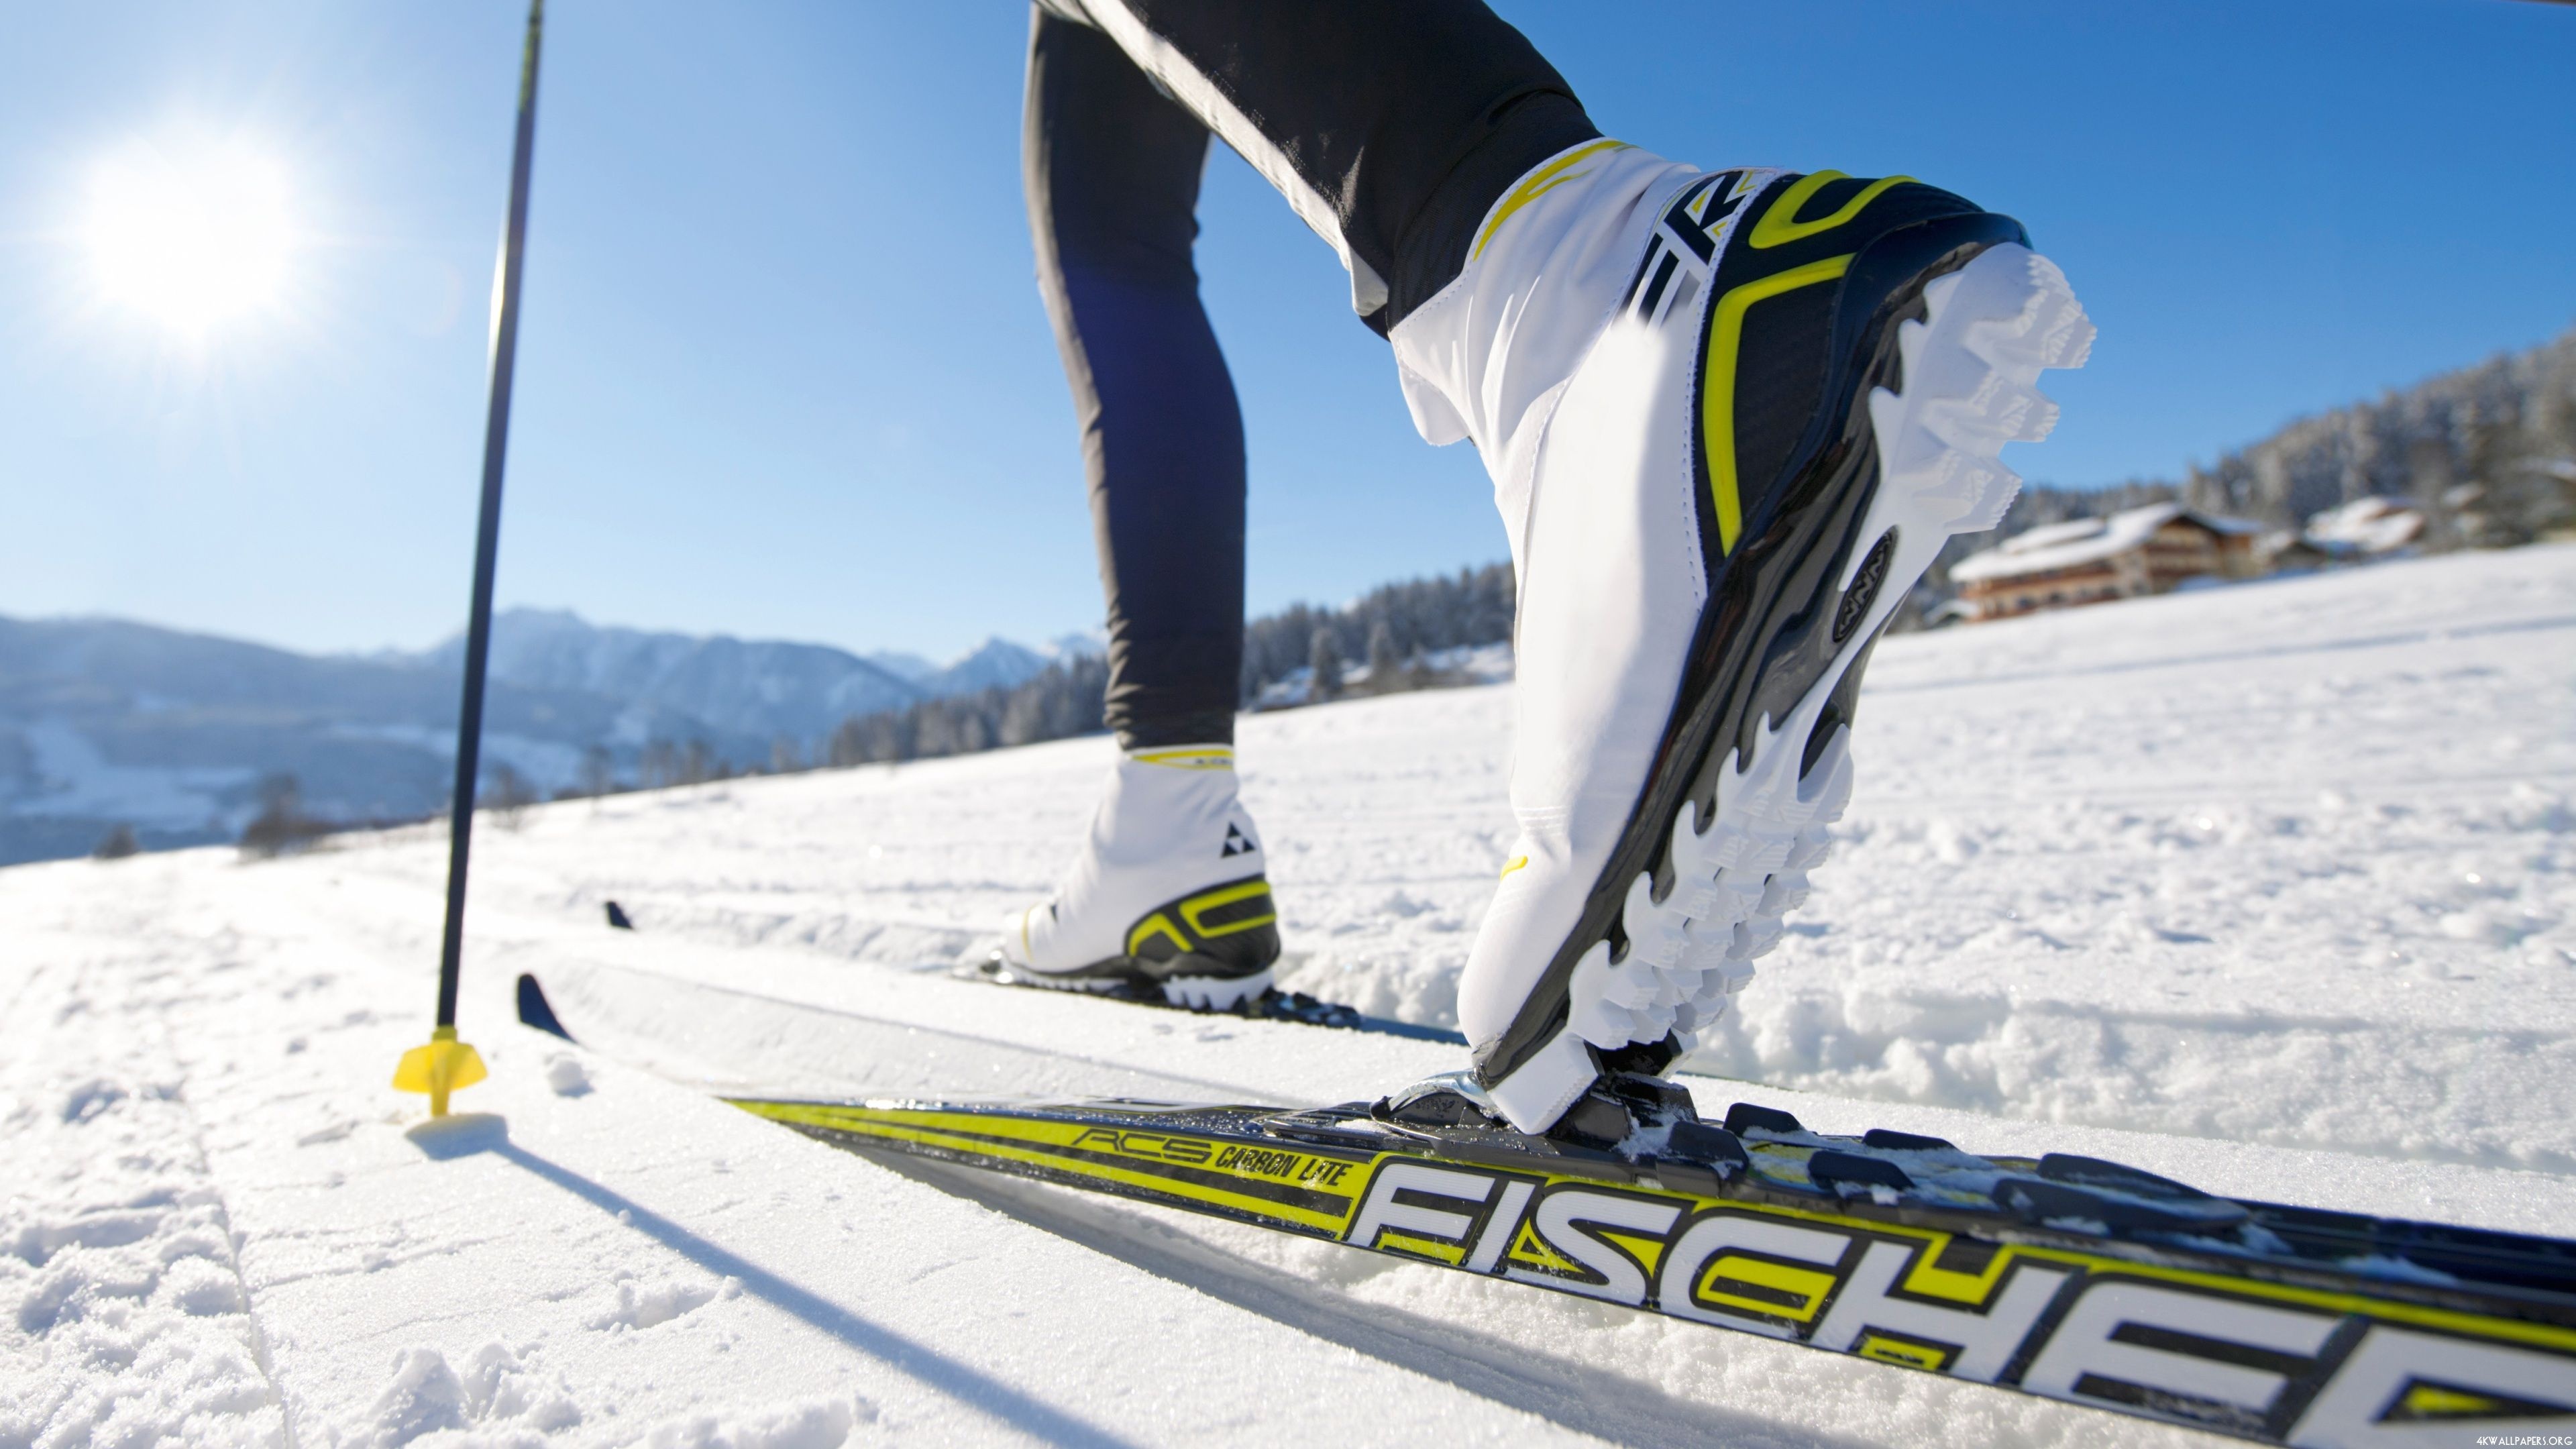 Skiing: Cross-country skis, Winter sports, A timed race on skis over a snow-covered track. 3840x2160 4K Background.